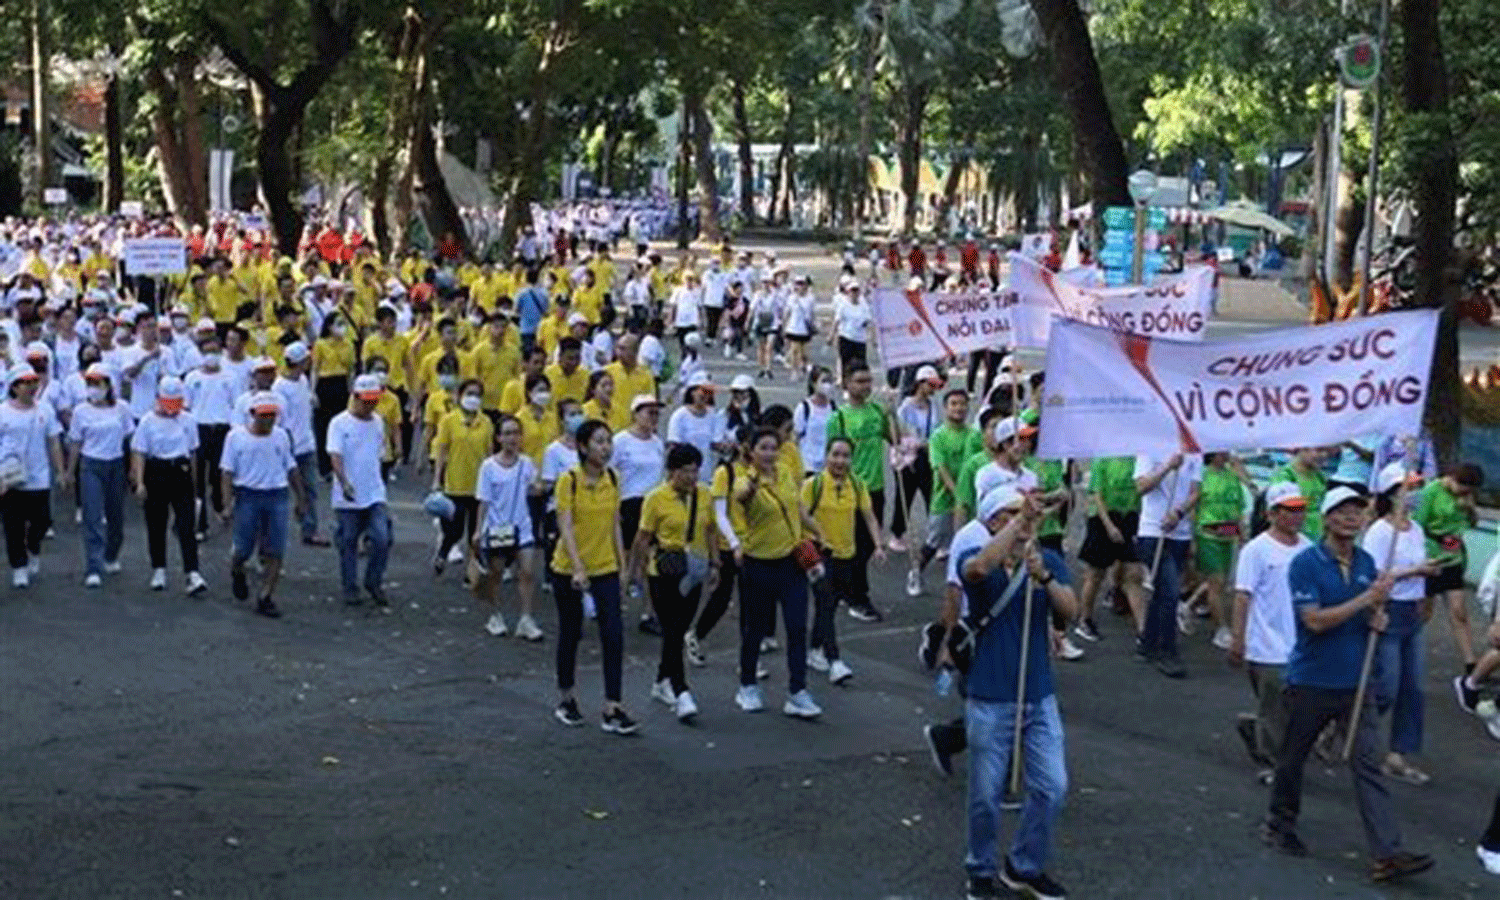 ABO/NDO- A charity walk for Agent Orange/dioxin victims was held at Dam Sen Cultural Park in Ho Chi Minh City on August 12, with 5,000 people taking part.